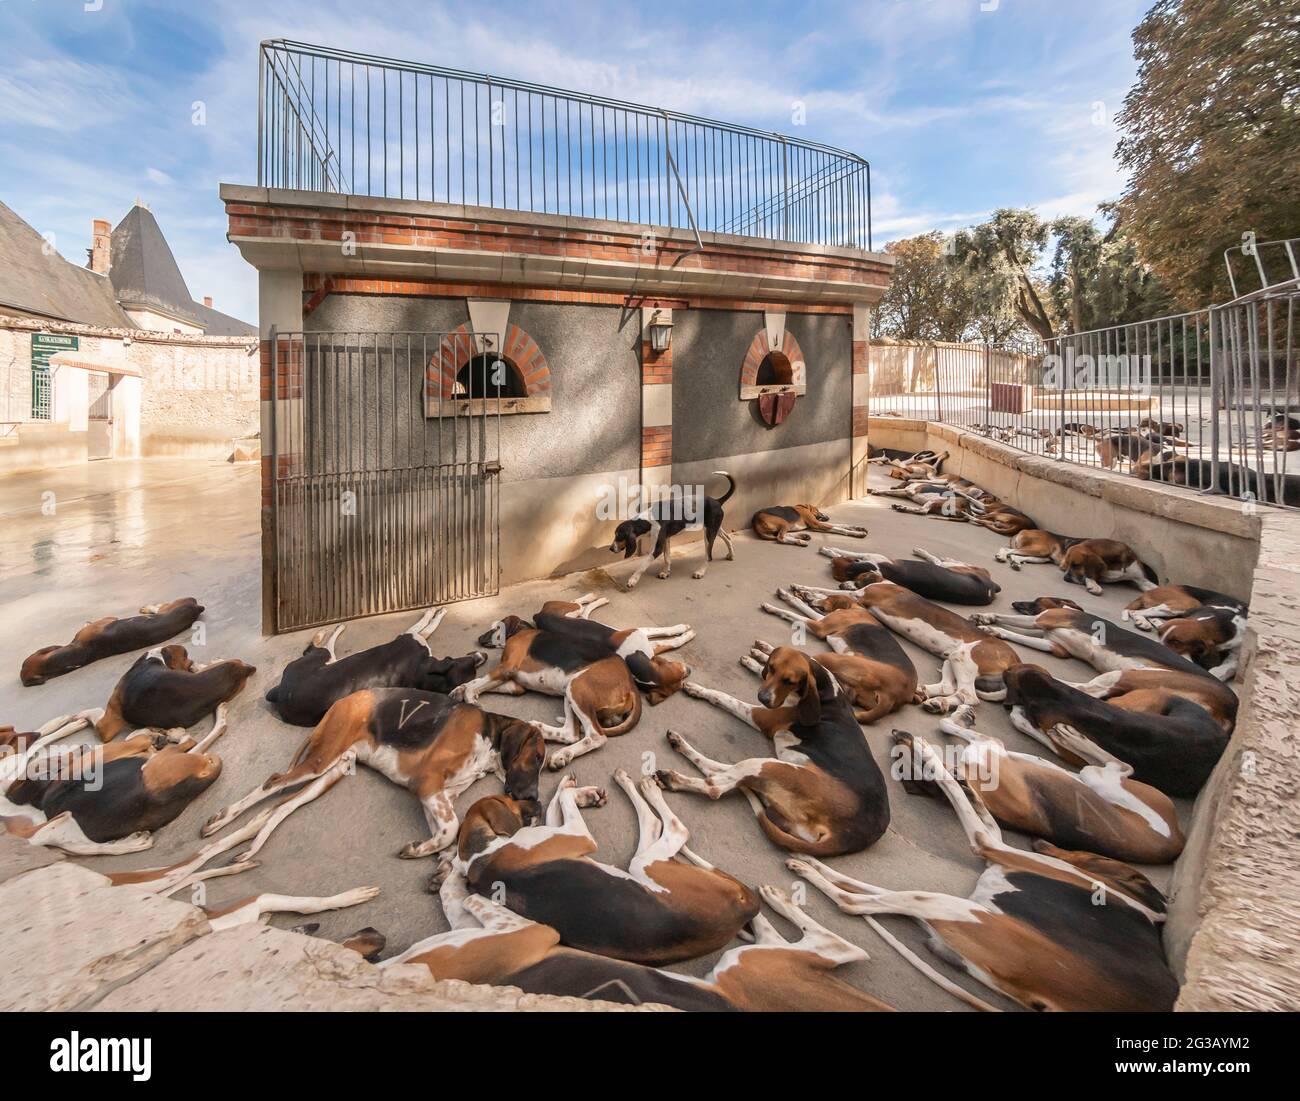 FRANCE - LOIRE VALLEY - LOIR ET CHER (41) - CASTLE OF CHEVERNY : THE KENNELS.  THE ESTATE IS ALSO A HOTSPOT FOR WINE. THE KENNELS ARE HOME TO A HUNDRED  Stock Photo - Alamy